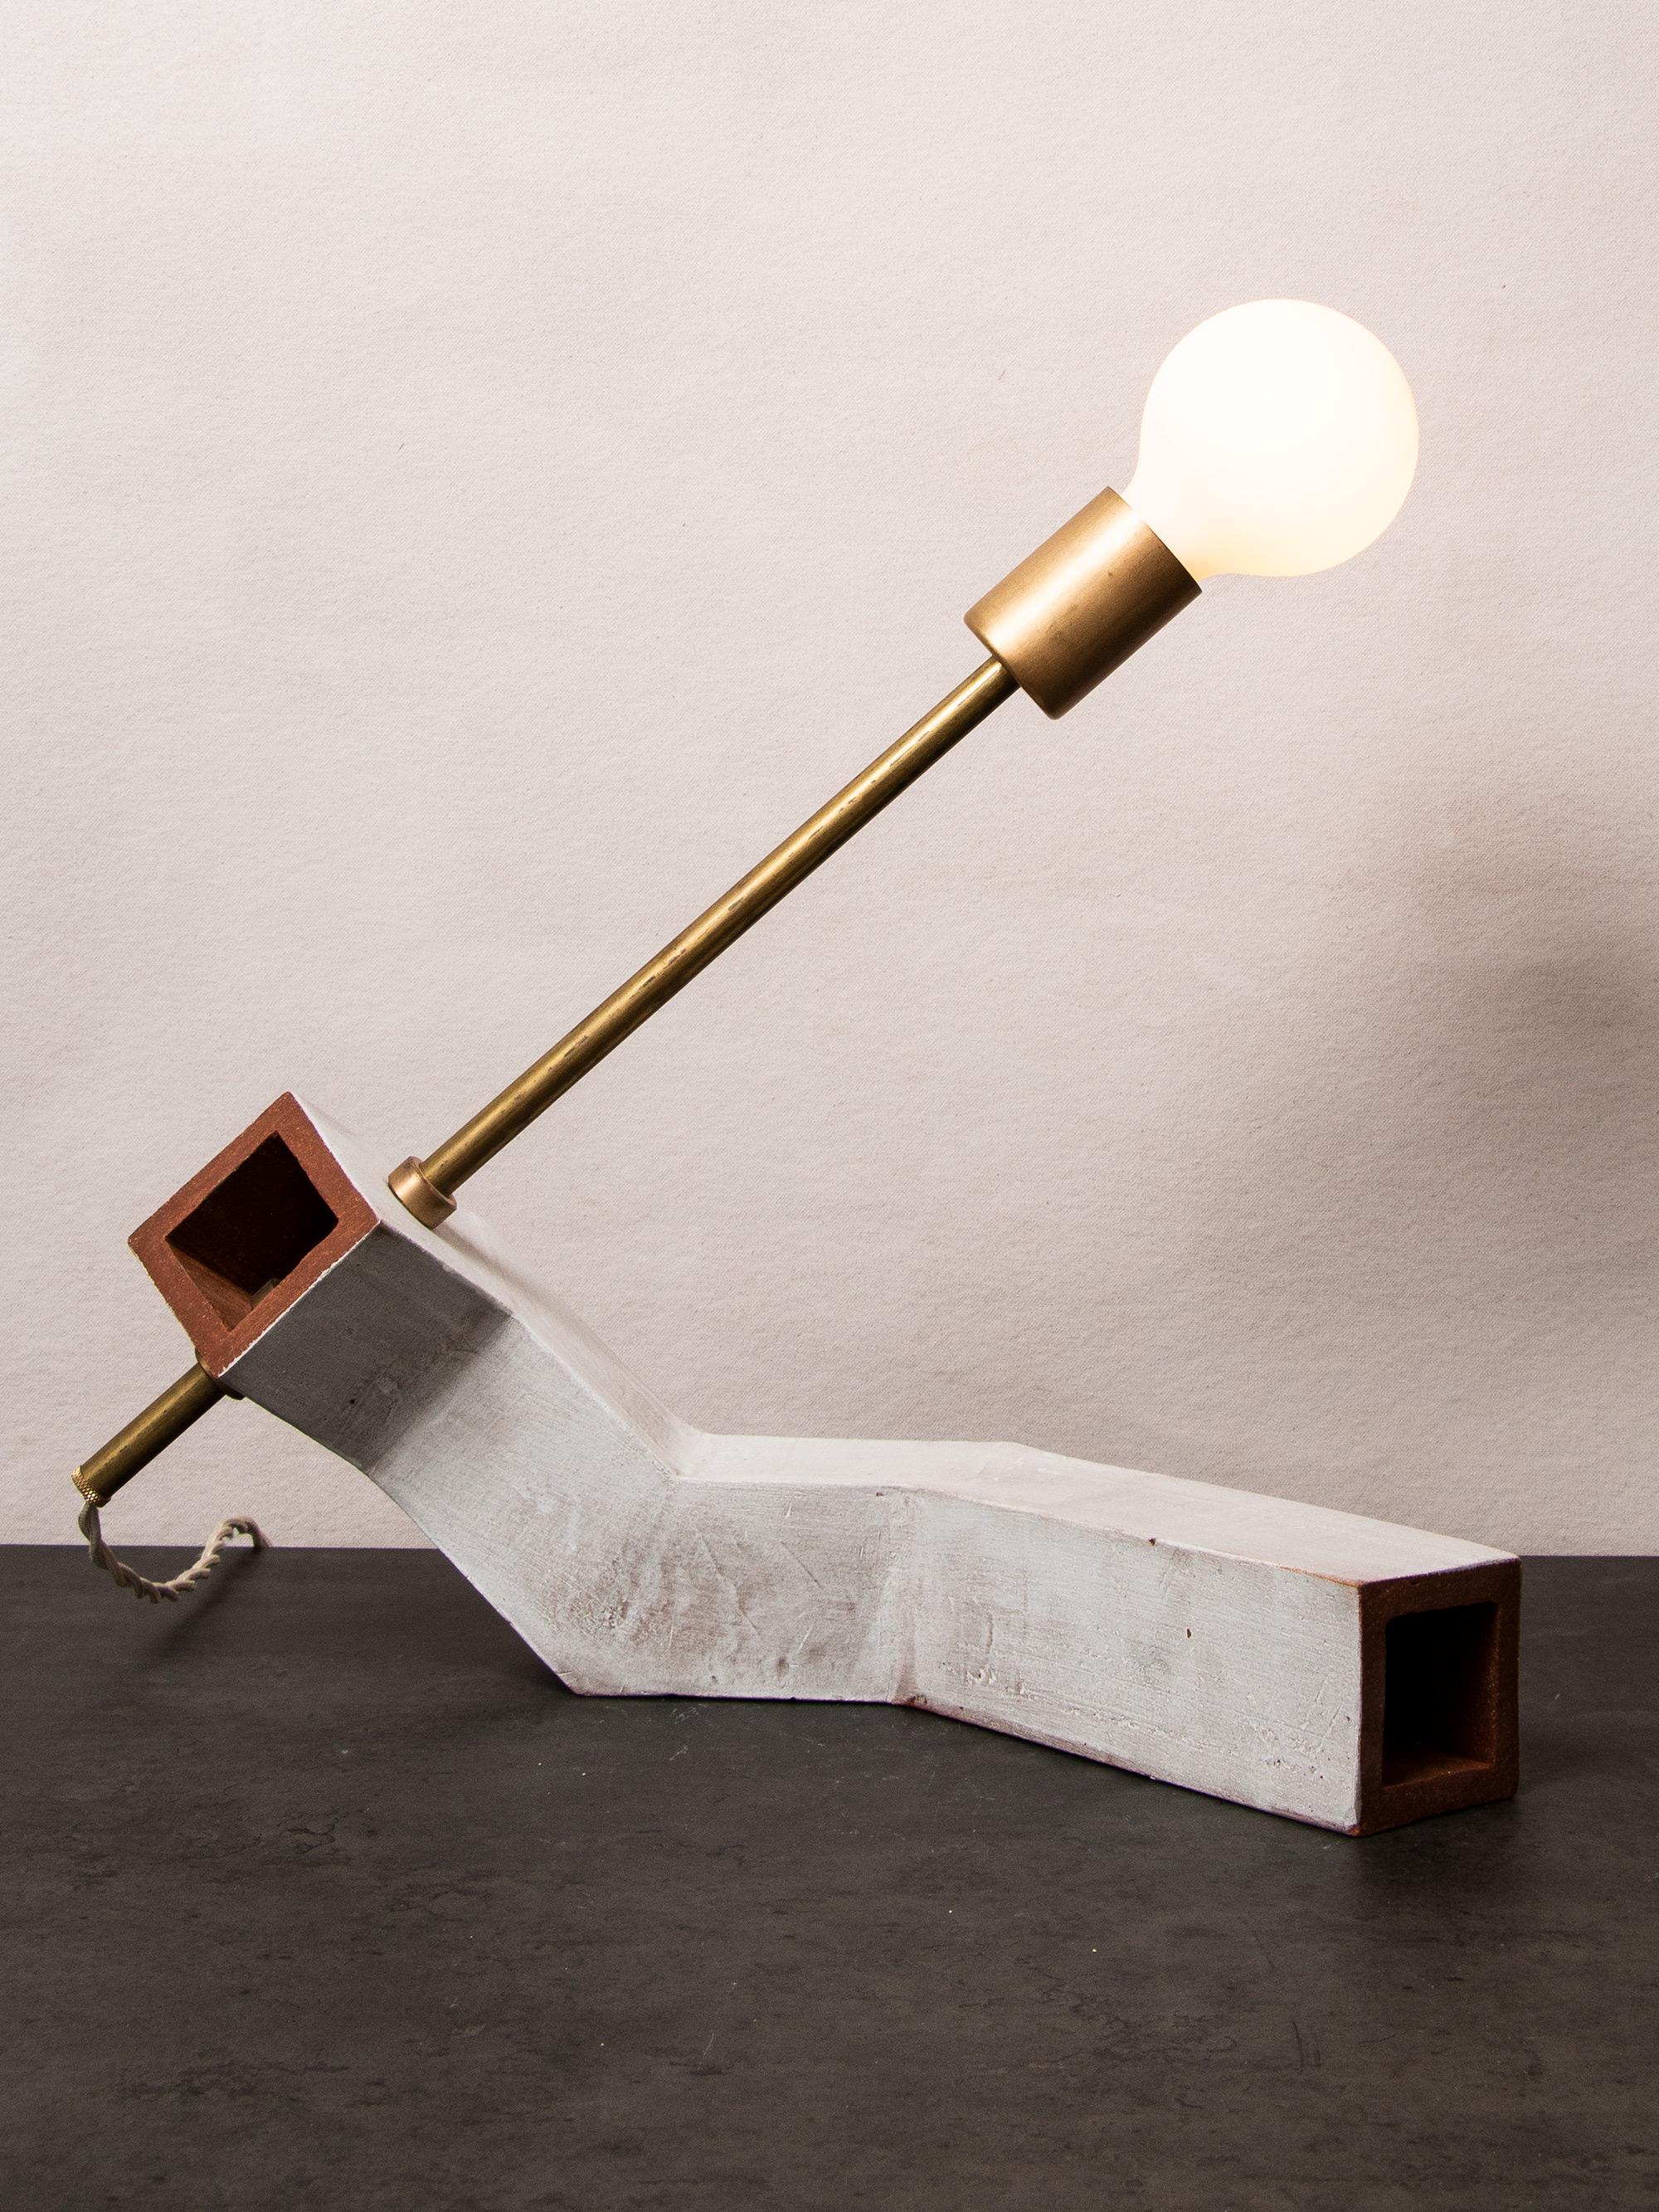 Inspired by midcentury Brutalist architecture and building materials, this playful table lamp balances a strong substantial ceramic base with delicate brass hardware and a modern exposed bulb. The asymmetrical angled rectangular base is handcrafted